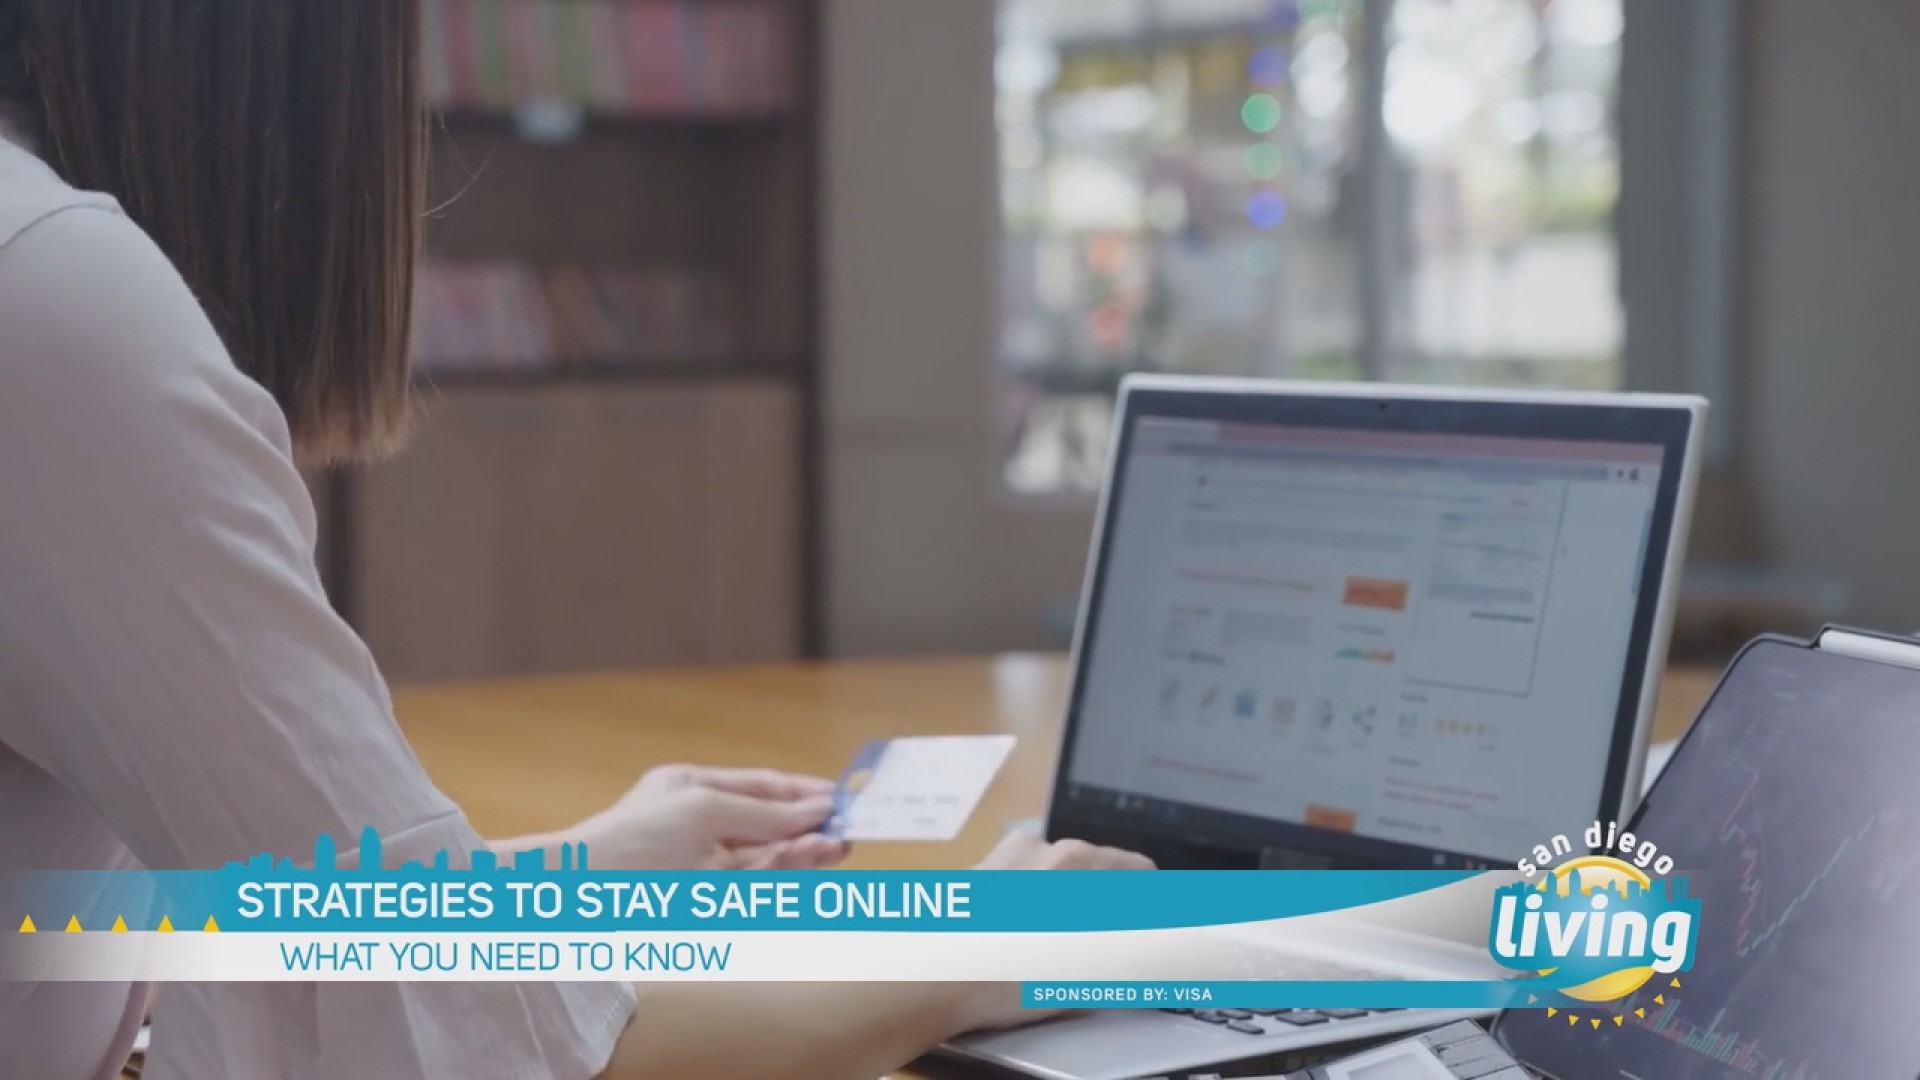 Strategies to Stay Safe Online with Visa. Sponsored by: Visa